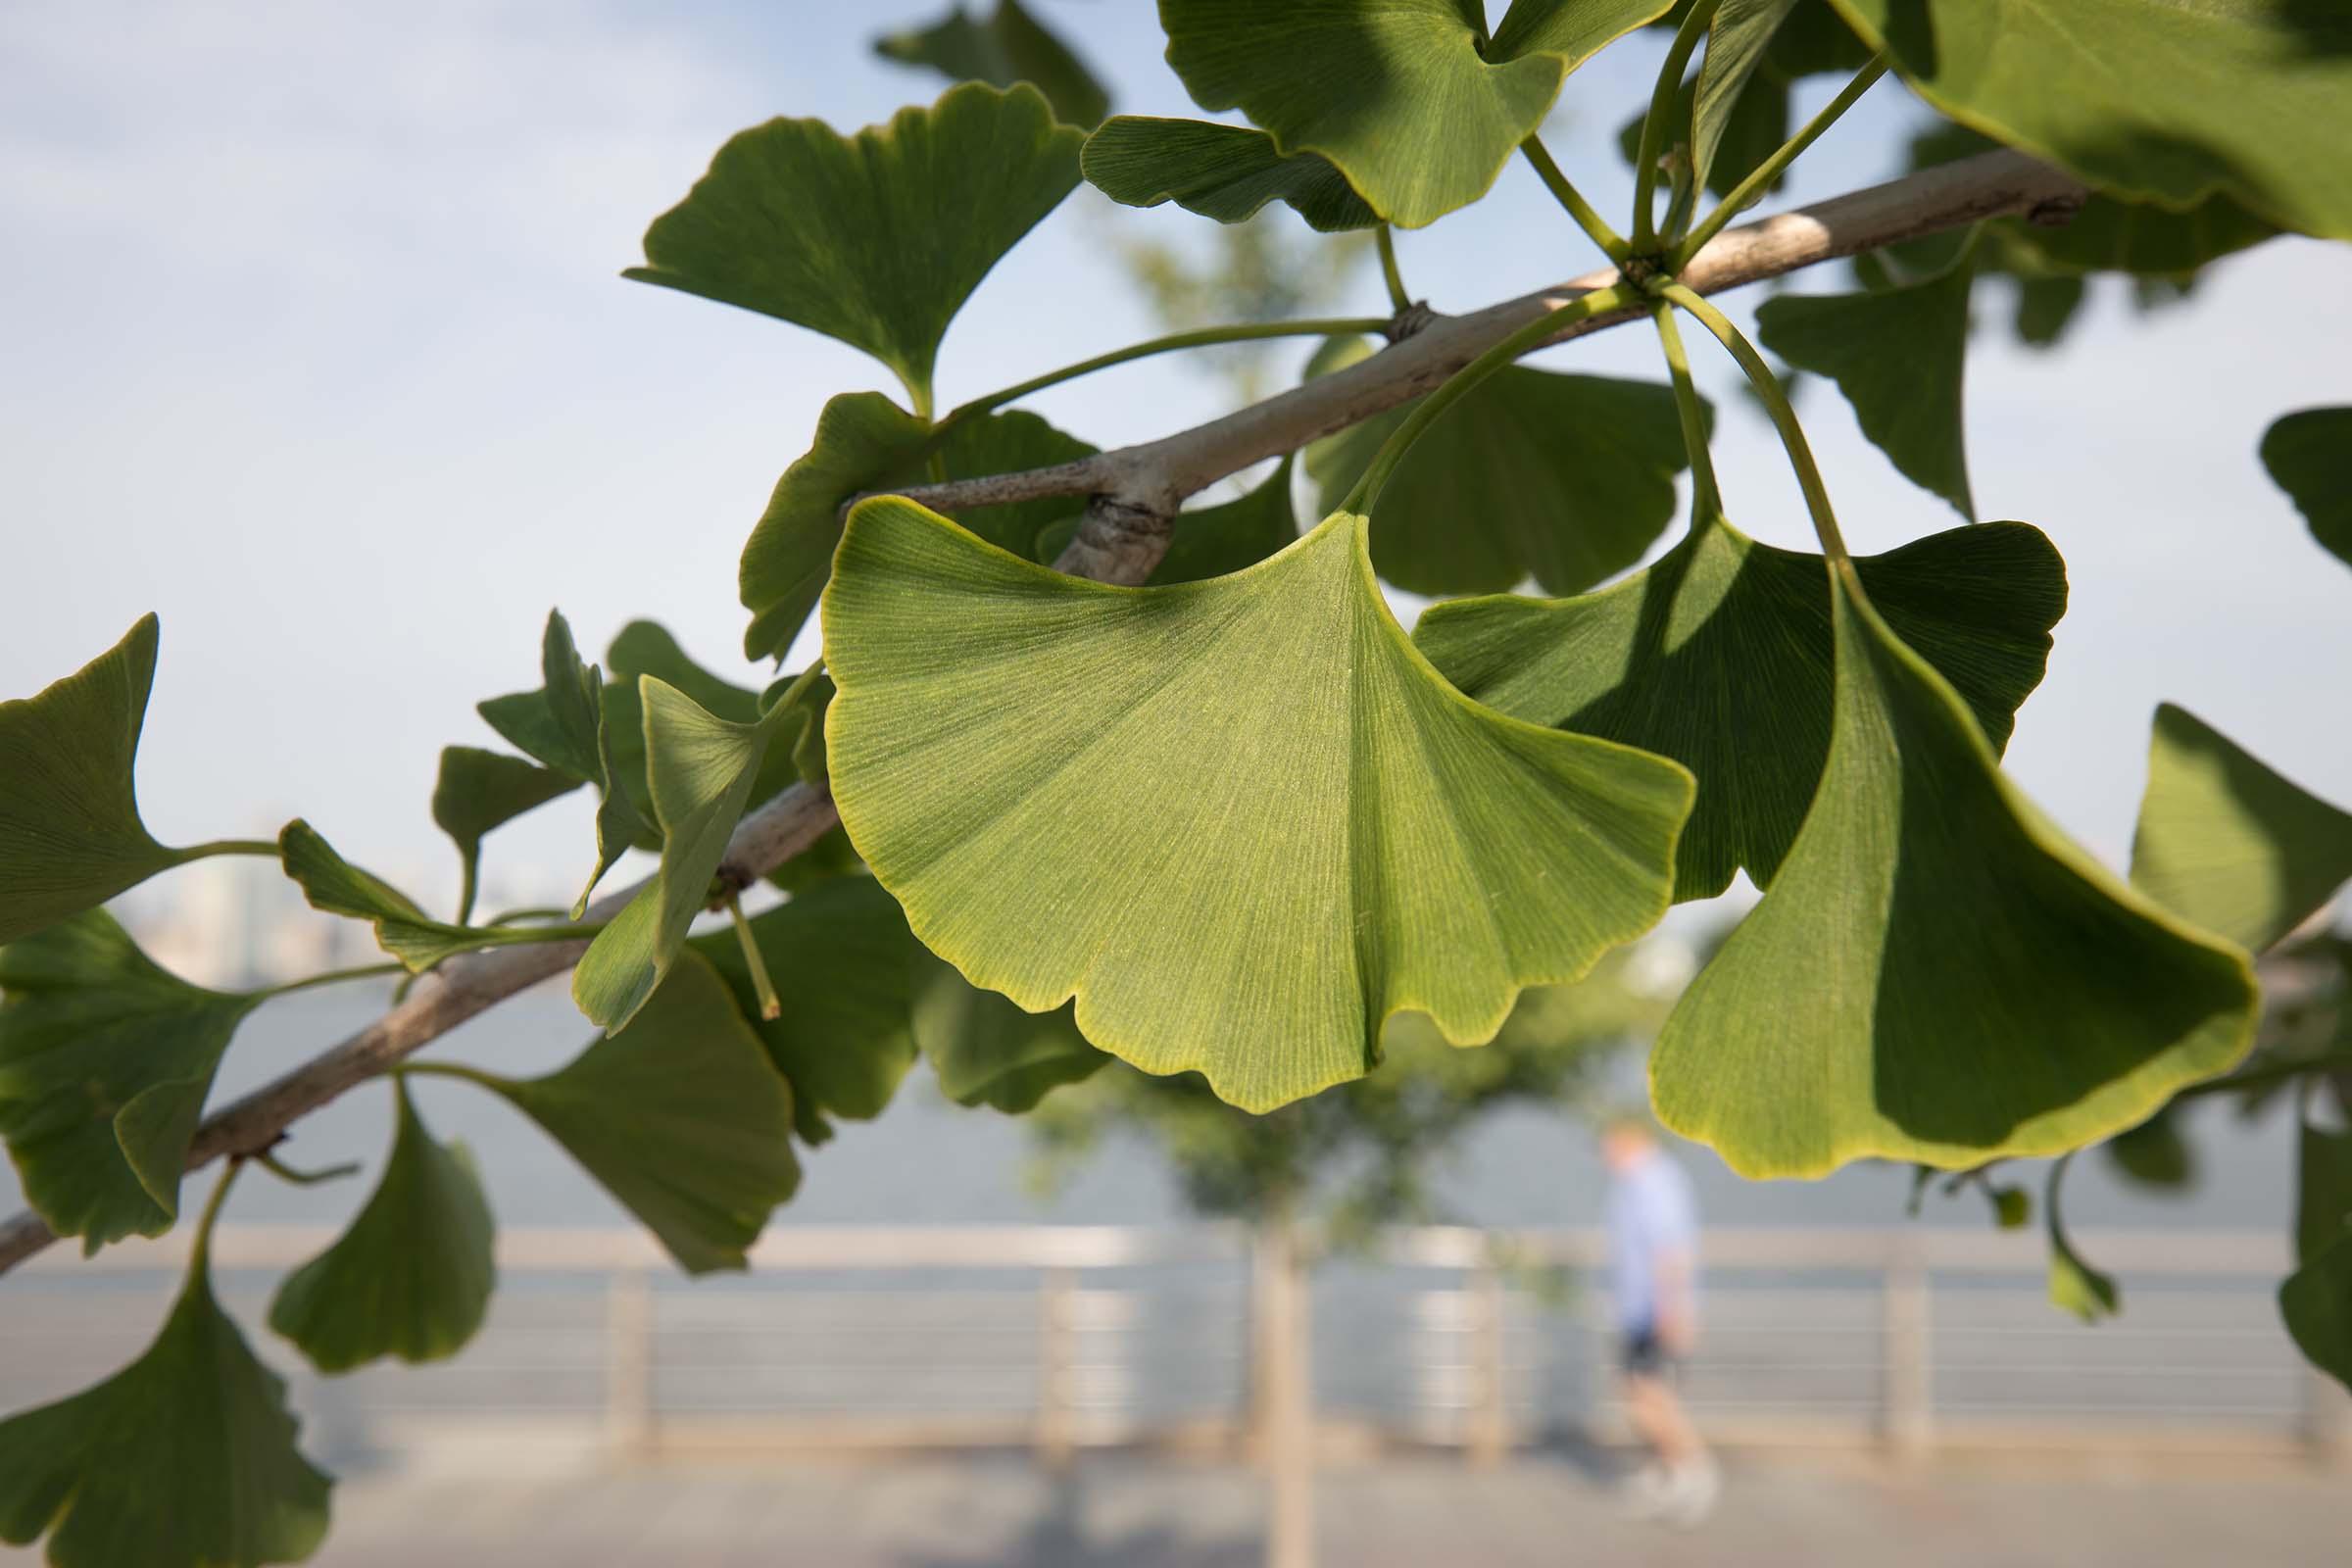 The fan shaped leaves of the Maindenhair tree have ruffles on the top portion